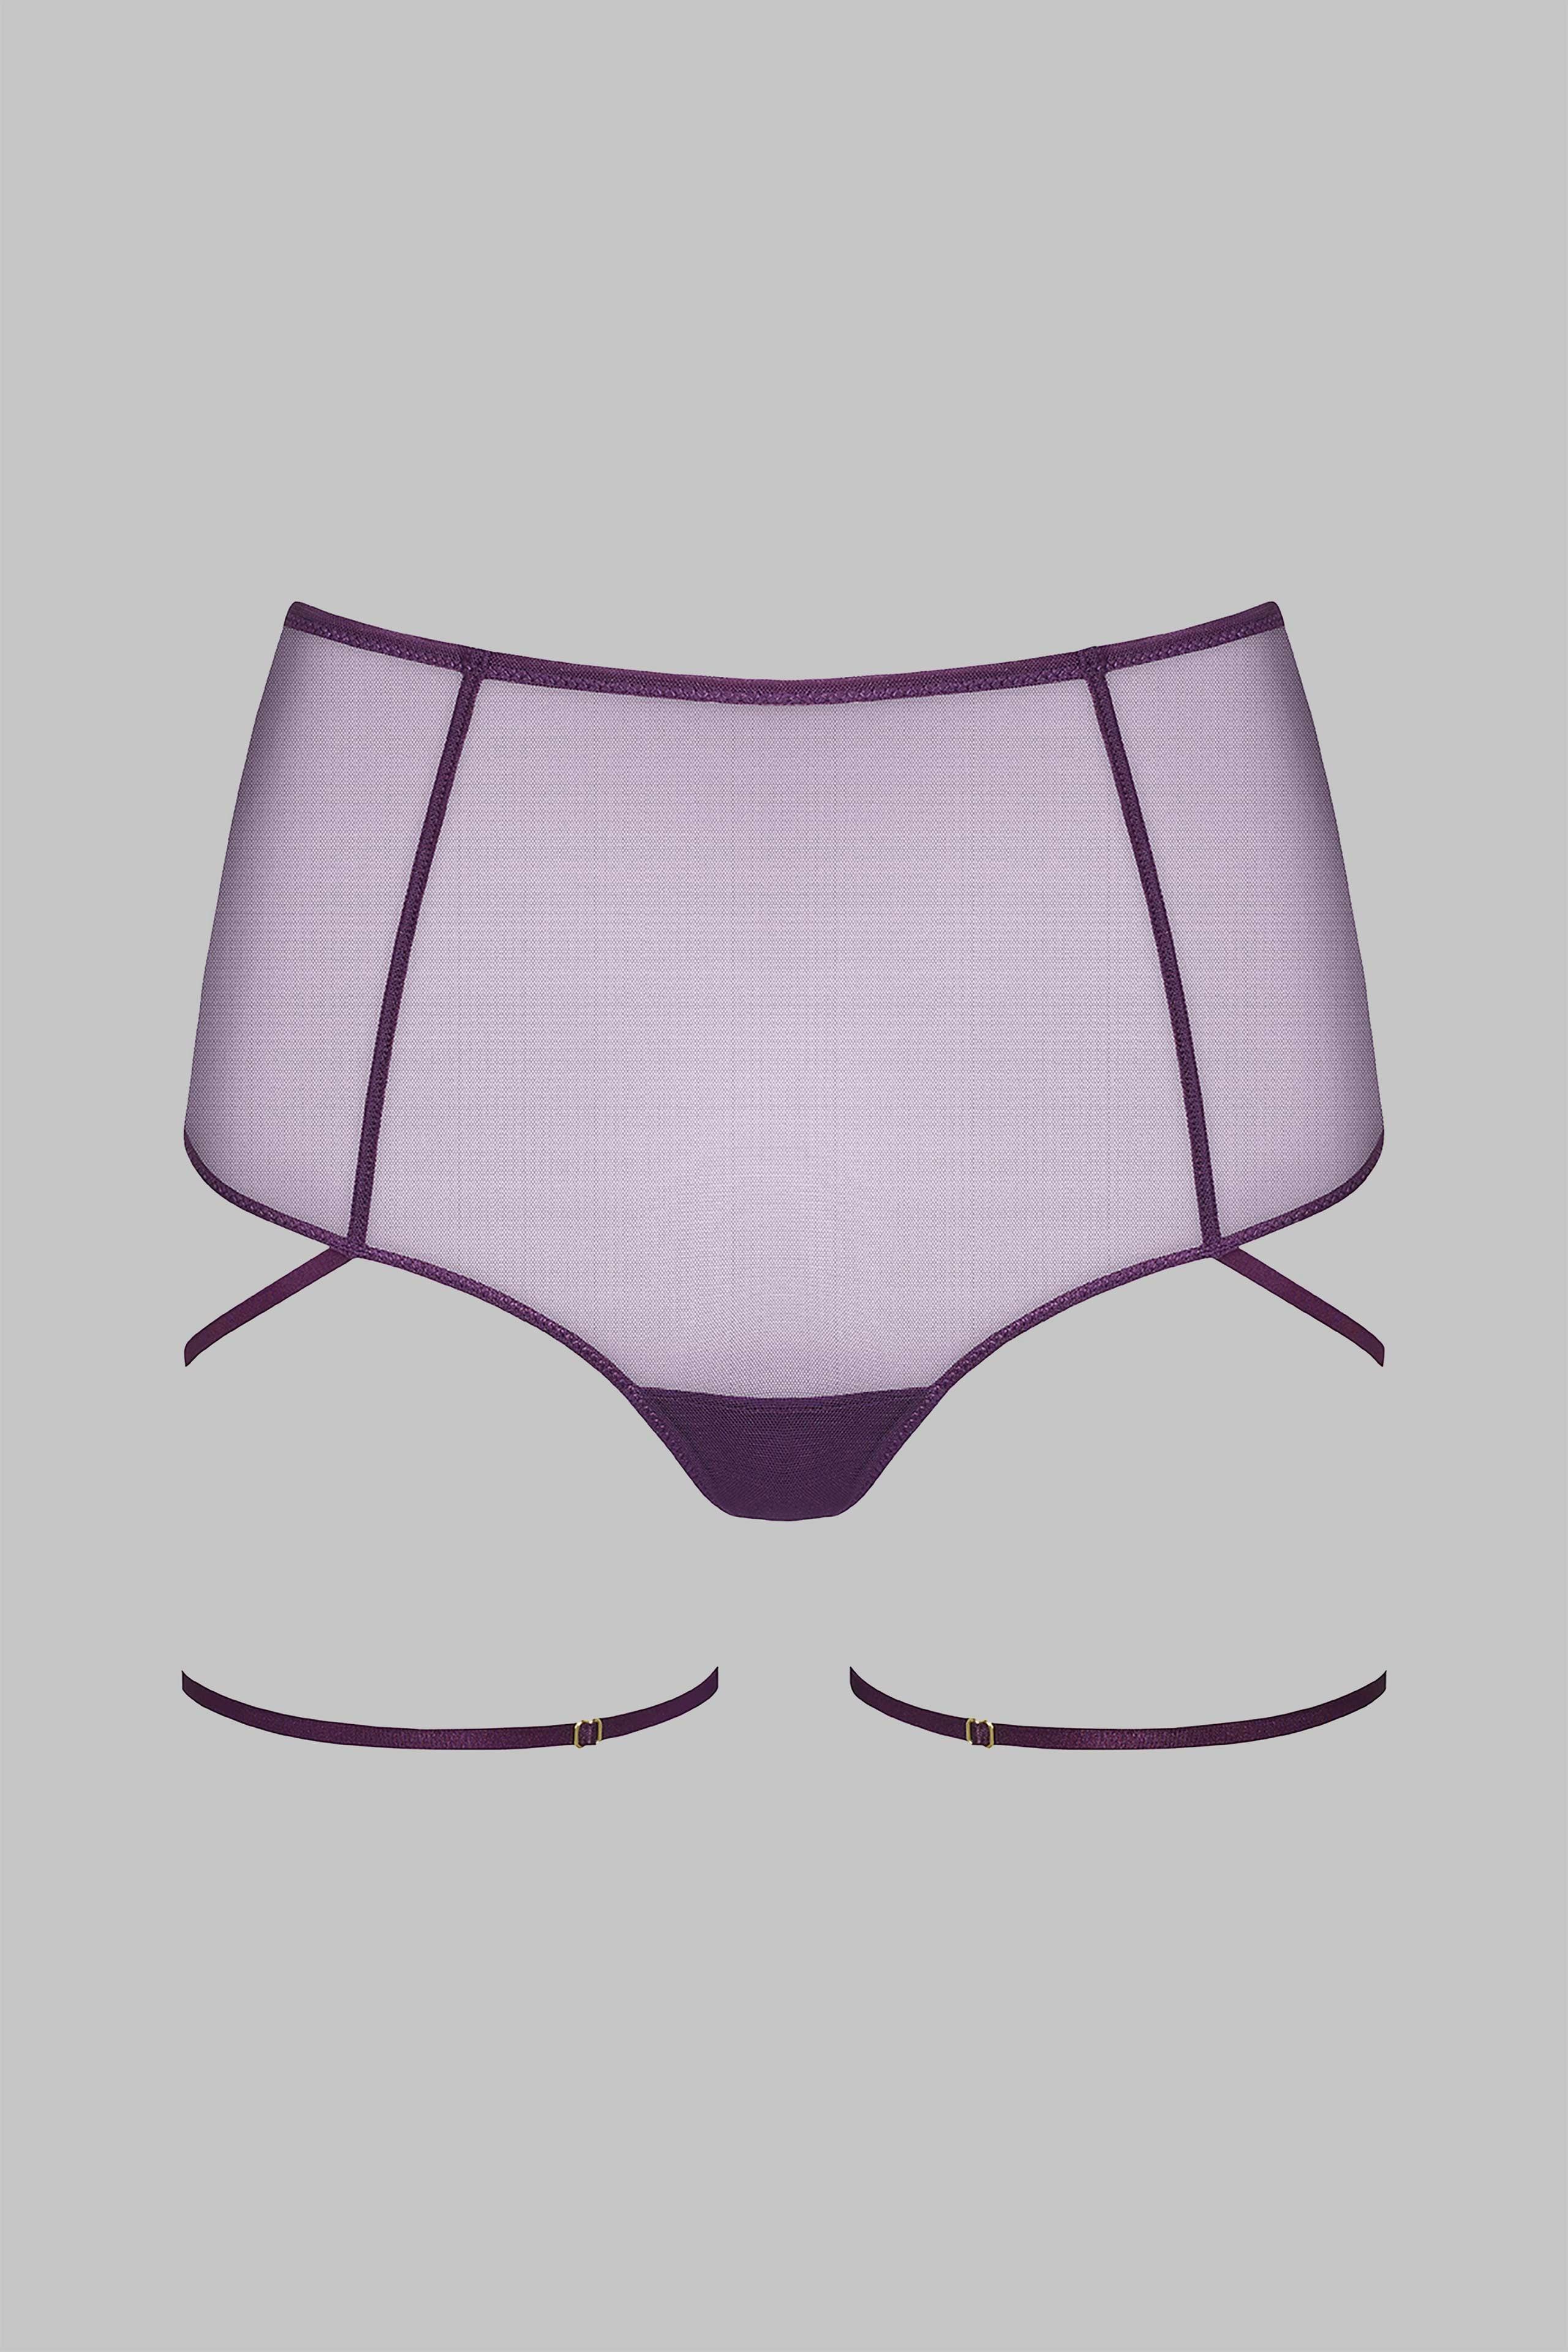 MAISON CLOSE  String mit hoher Taille - L'Amoureuse 